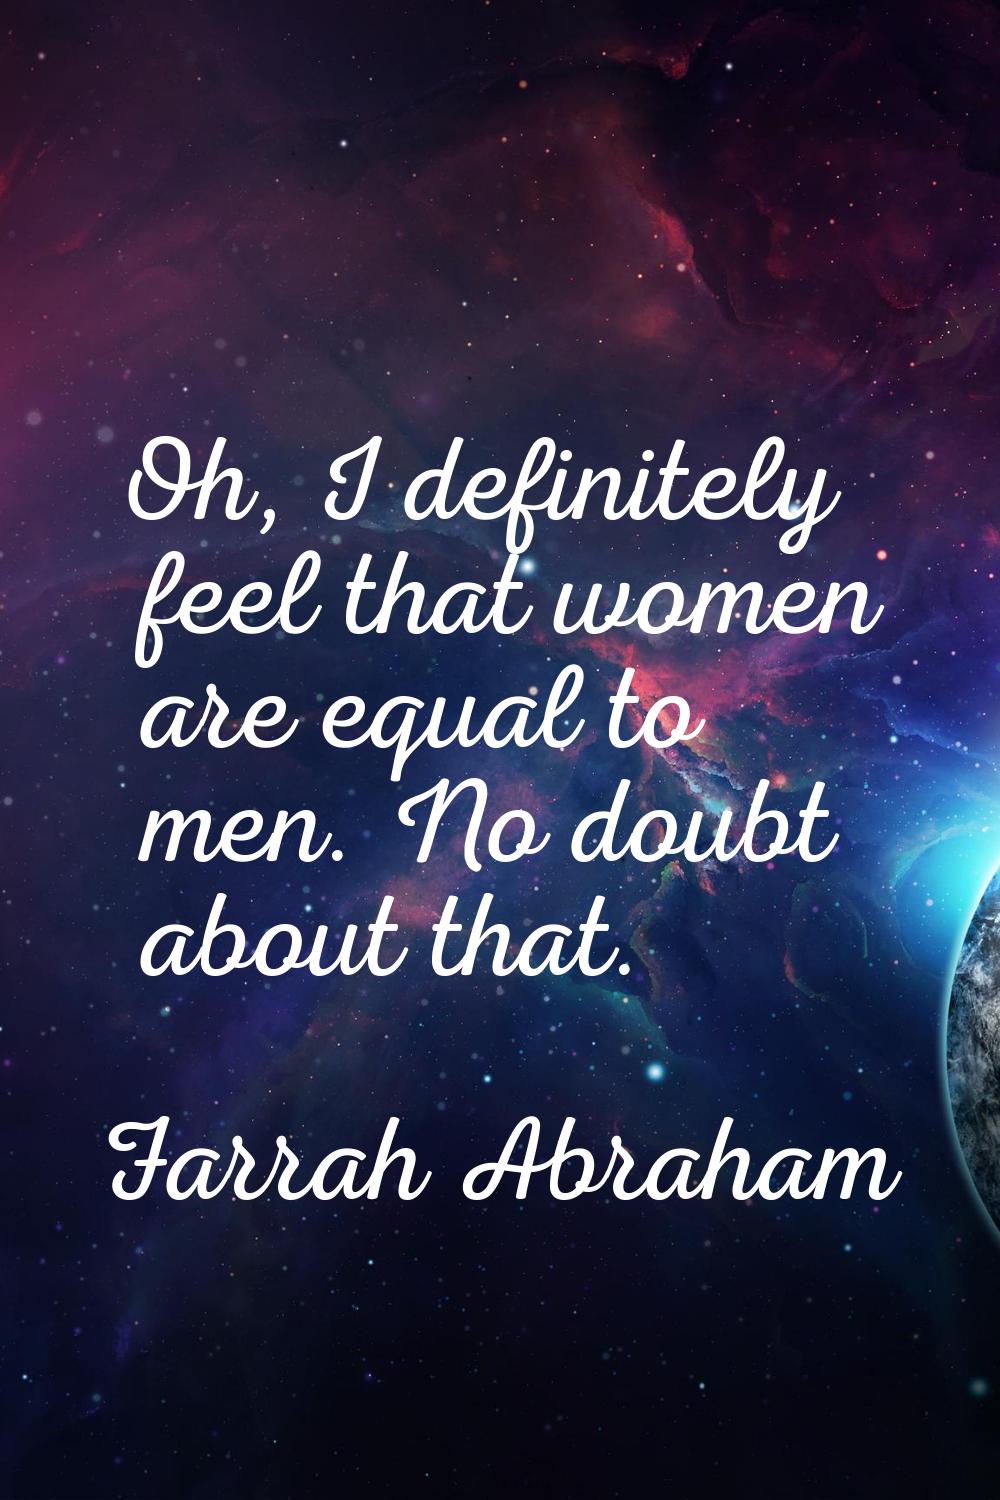 Oh, I definitely feel that women are equal to men. No doubt about that.